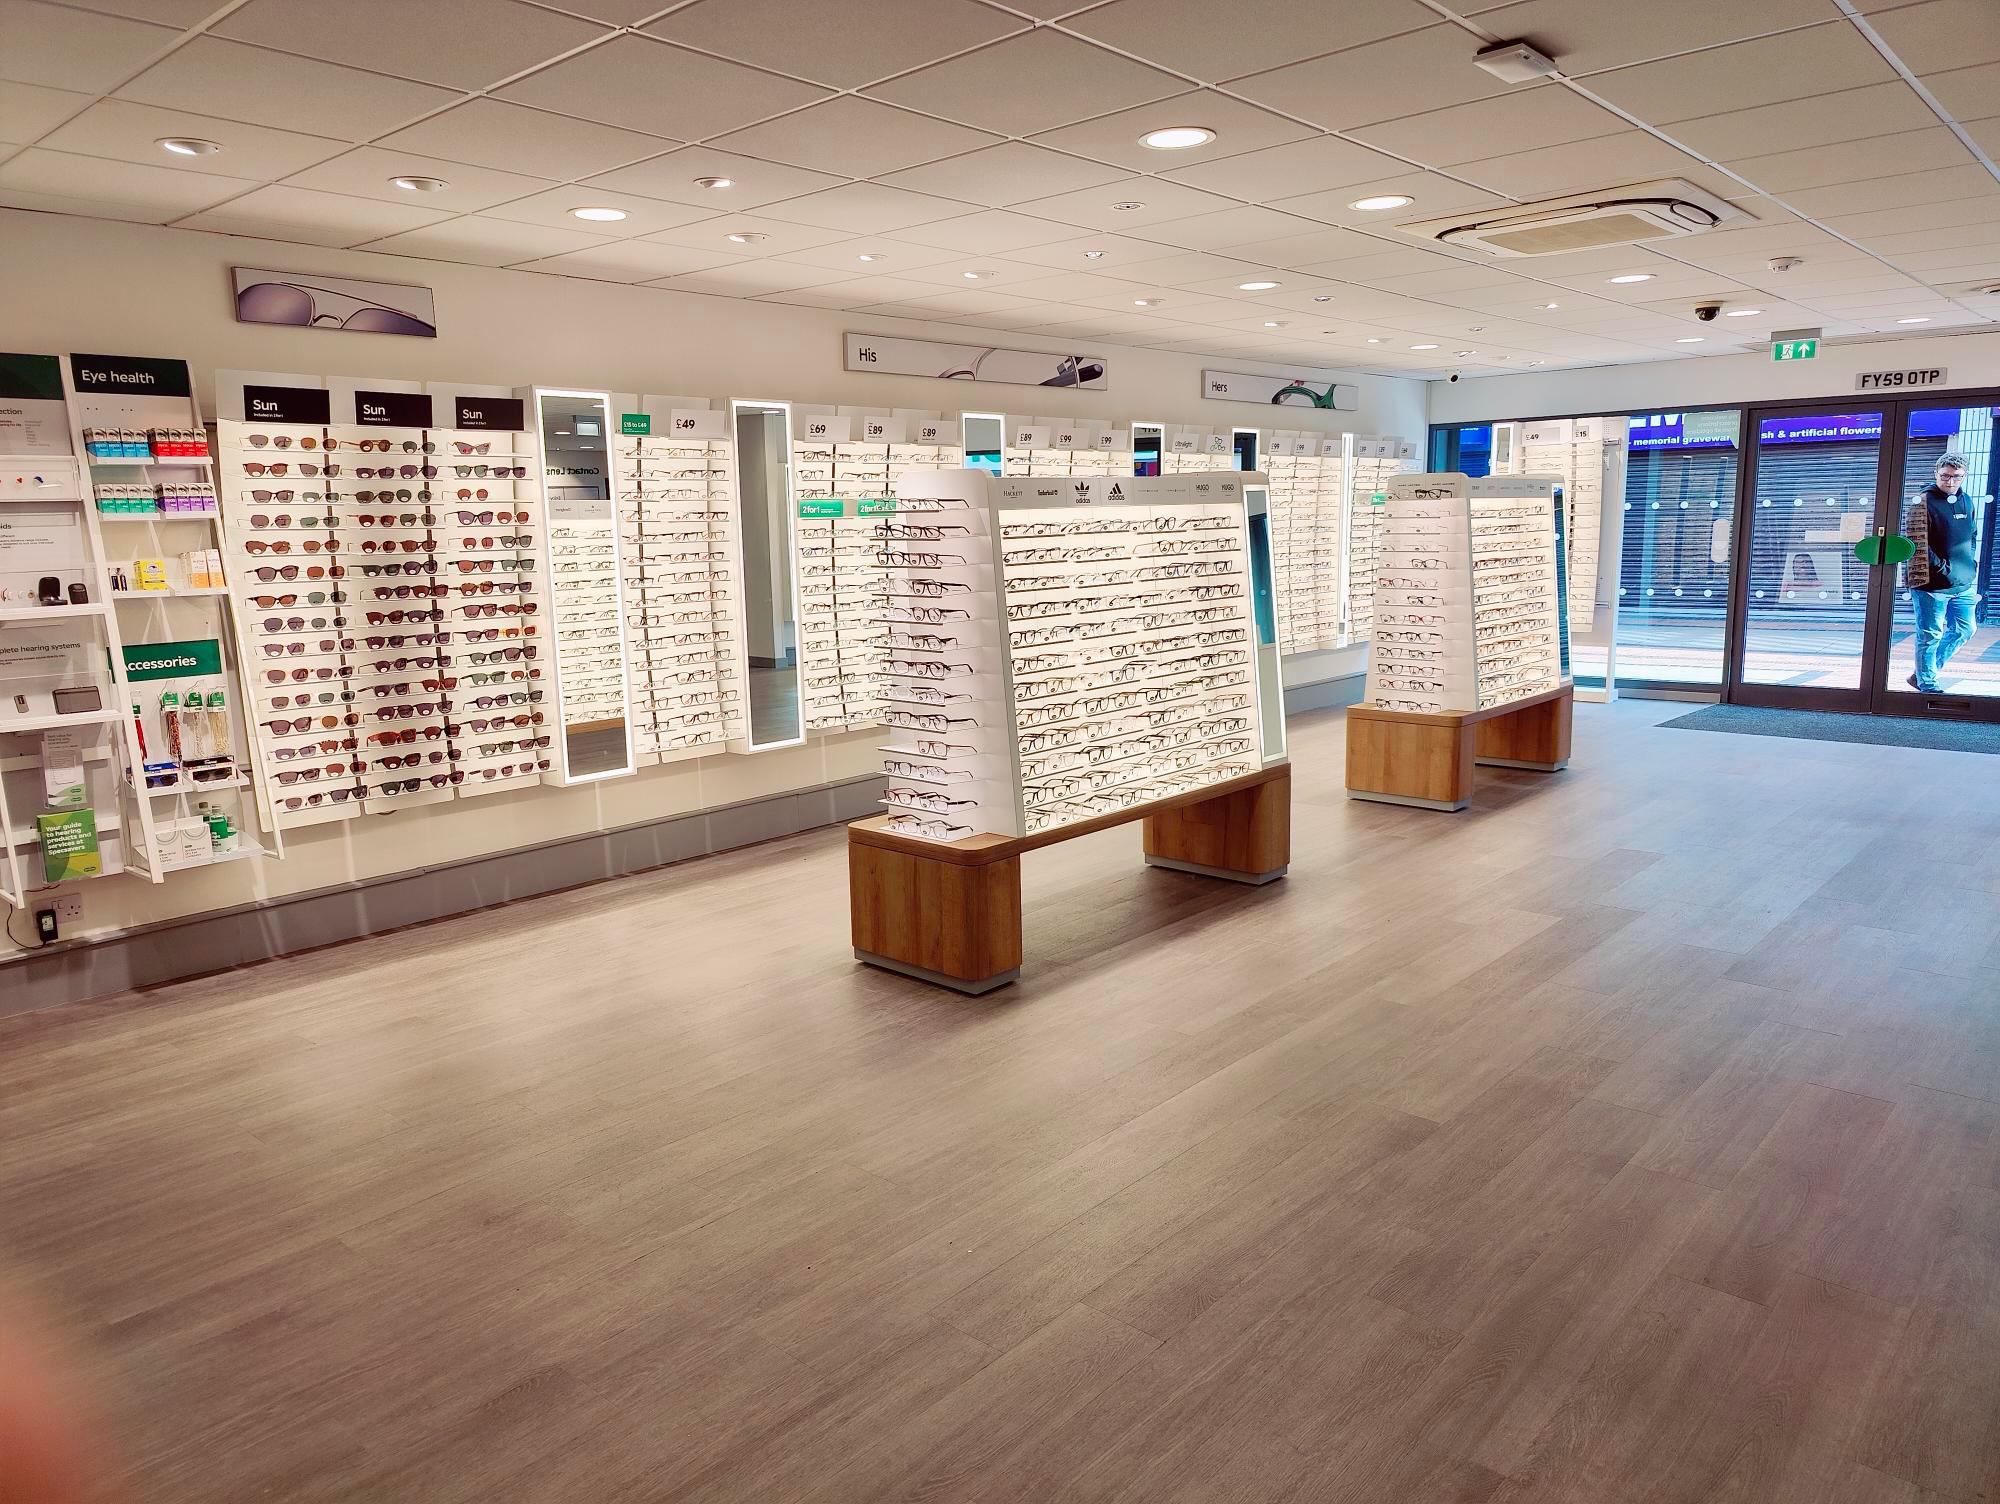 Images Specsavers Opticians and Audiologists - Birkenhead